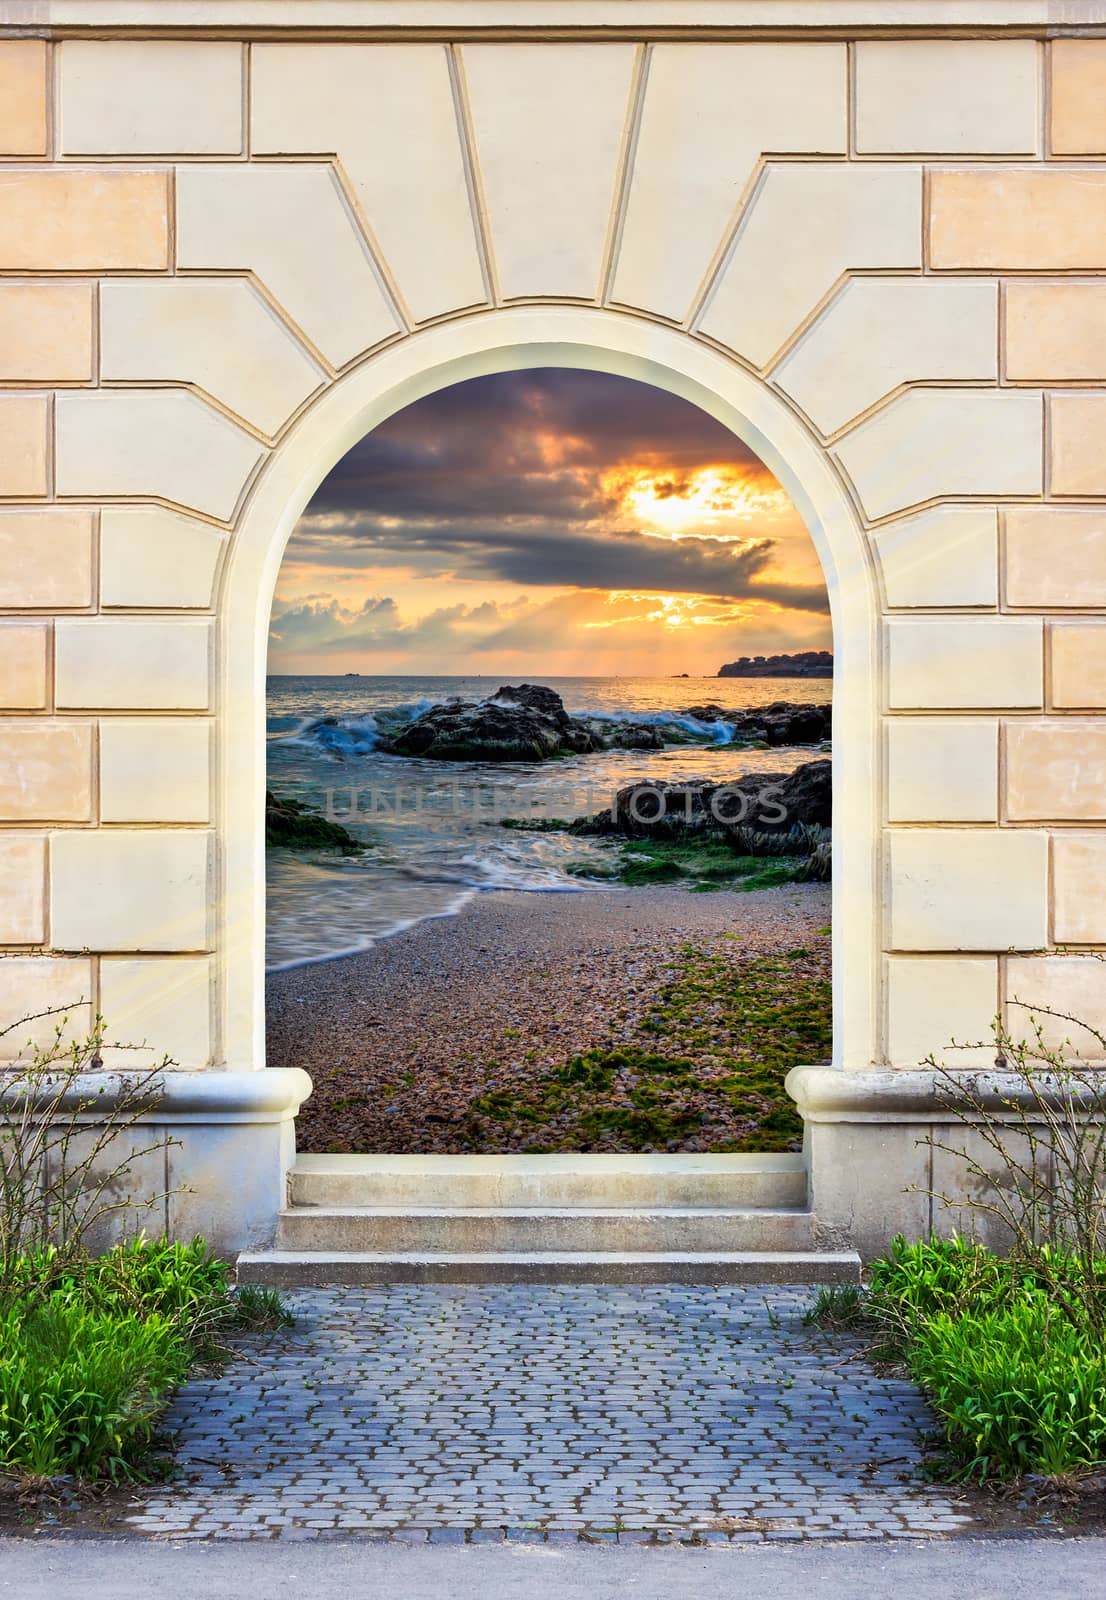 Frame of desolate immured door with picture of sea shore morning  and steps of cut stone